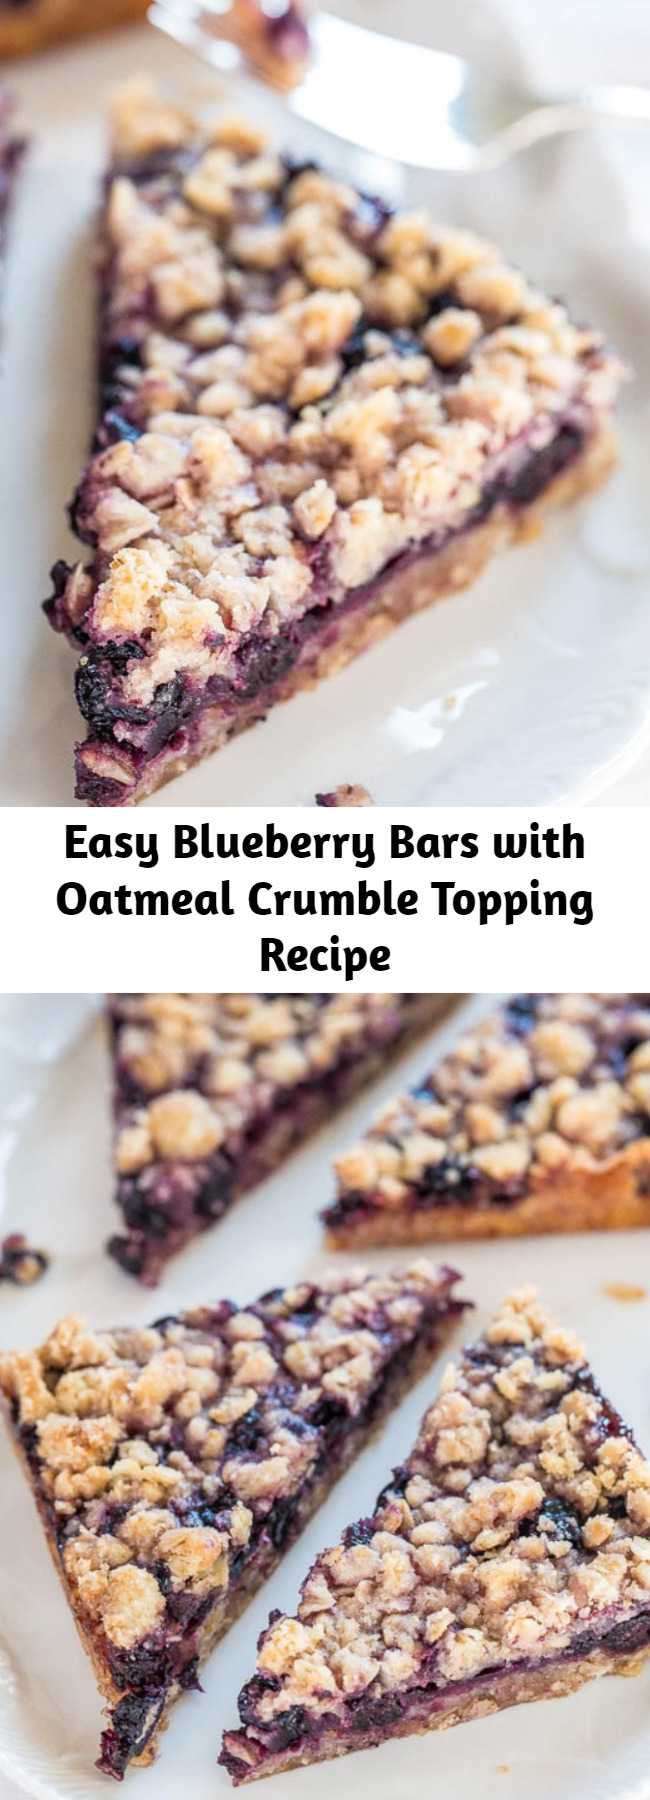 Easy Blueberry Bars with Oatmeal Crumble Topping Recipe - These bars are buttery and packed with blueberry flavor! They take just 10 minutes of prep and then go straight into the oven. So easy to make, and a crowd pleaser every time!